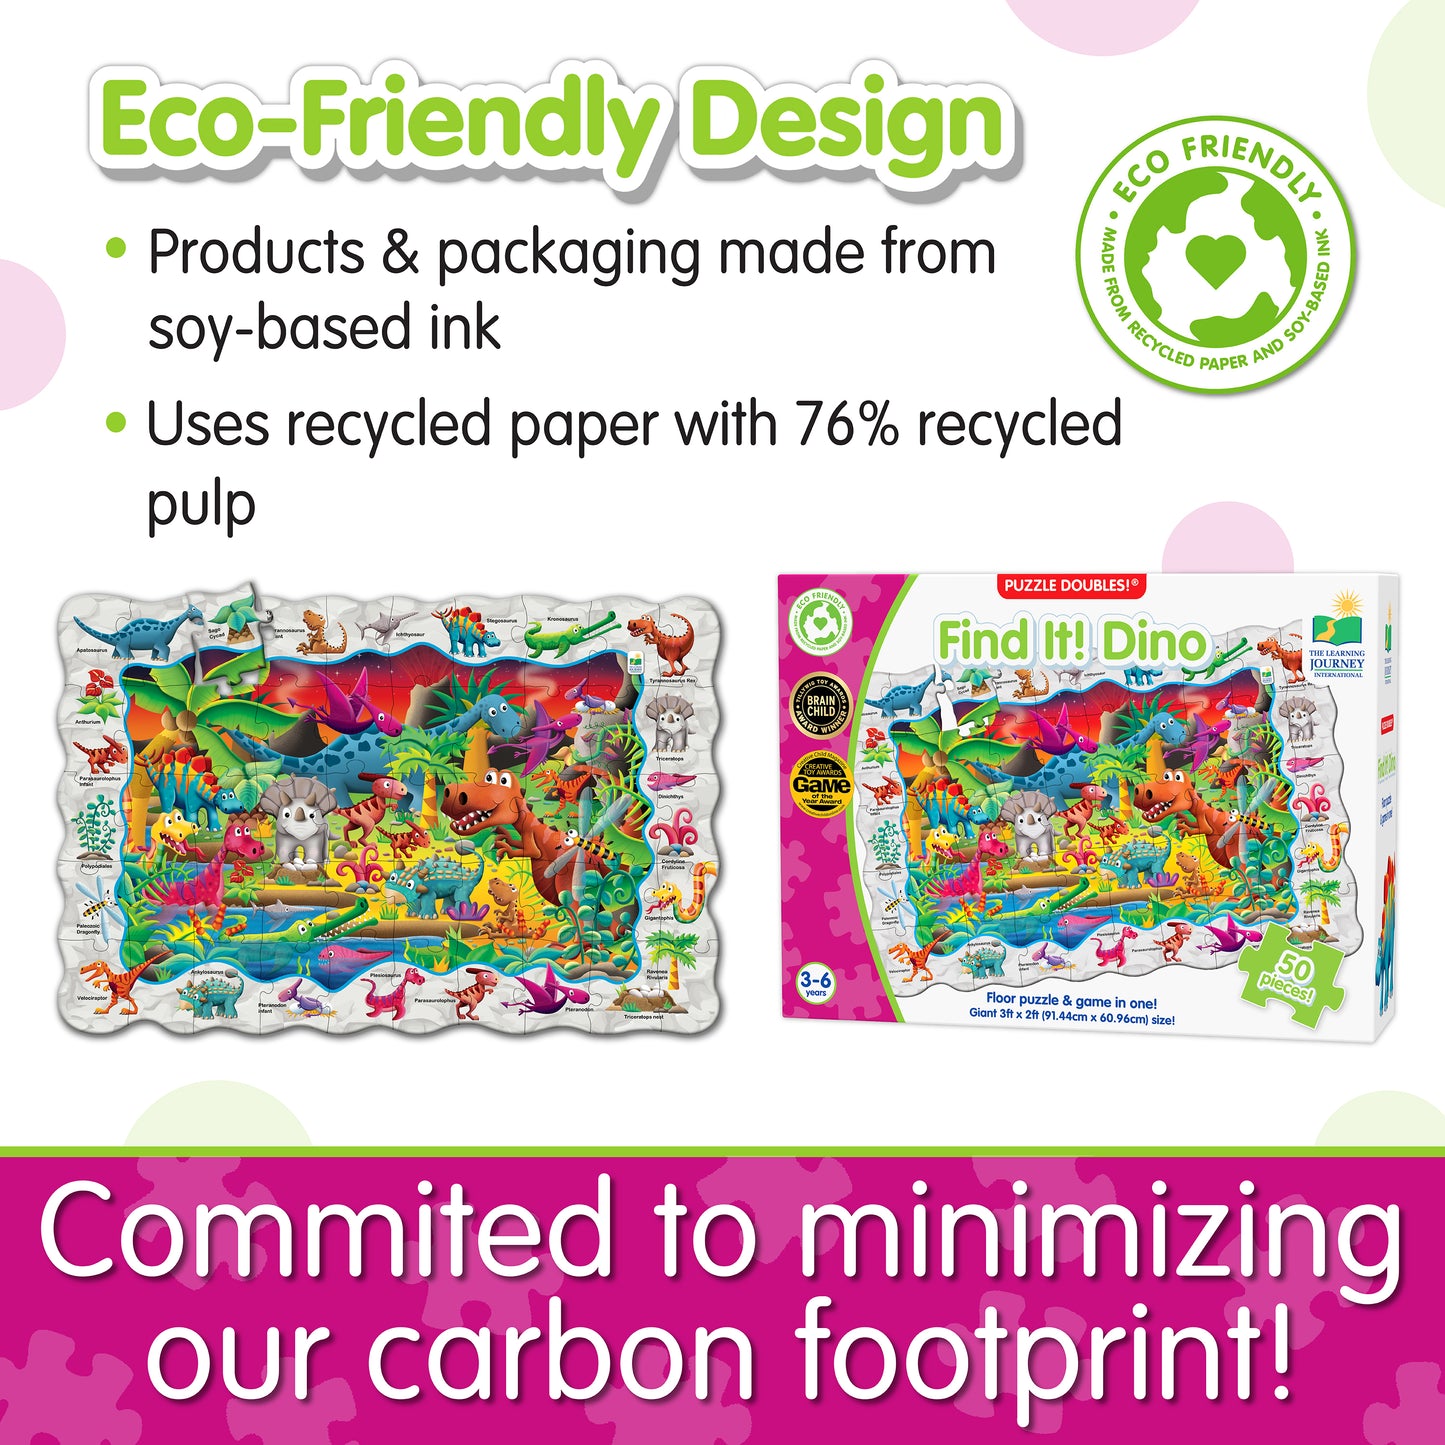 Infographic about Find It - Dino's eco-friendly design that says, "Committed to minimizing our carbon footprint!"